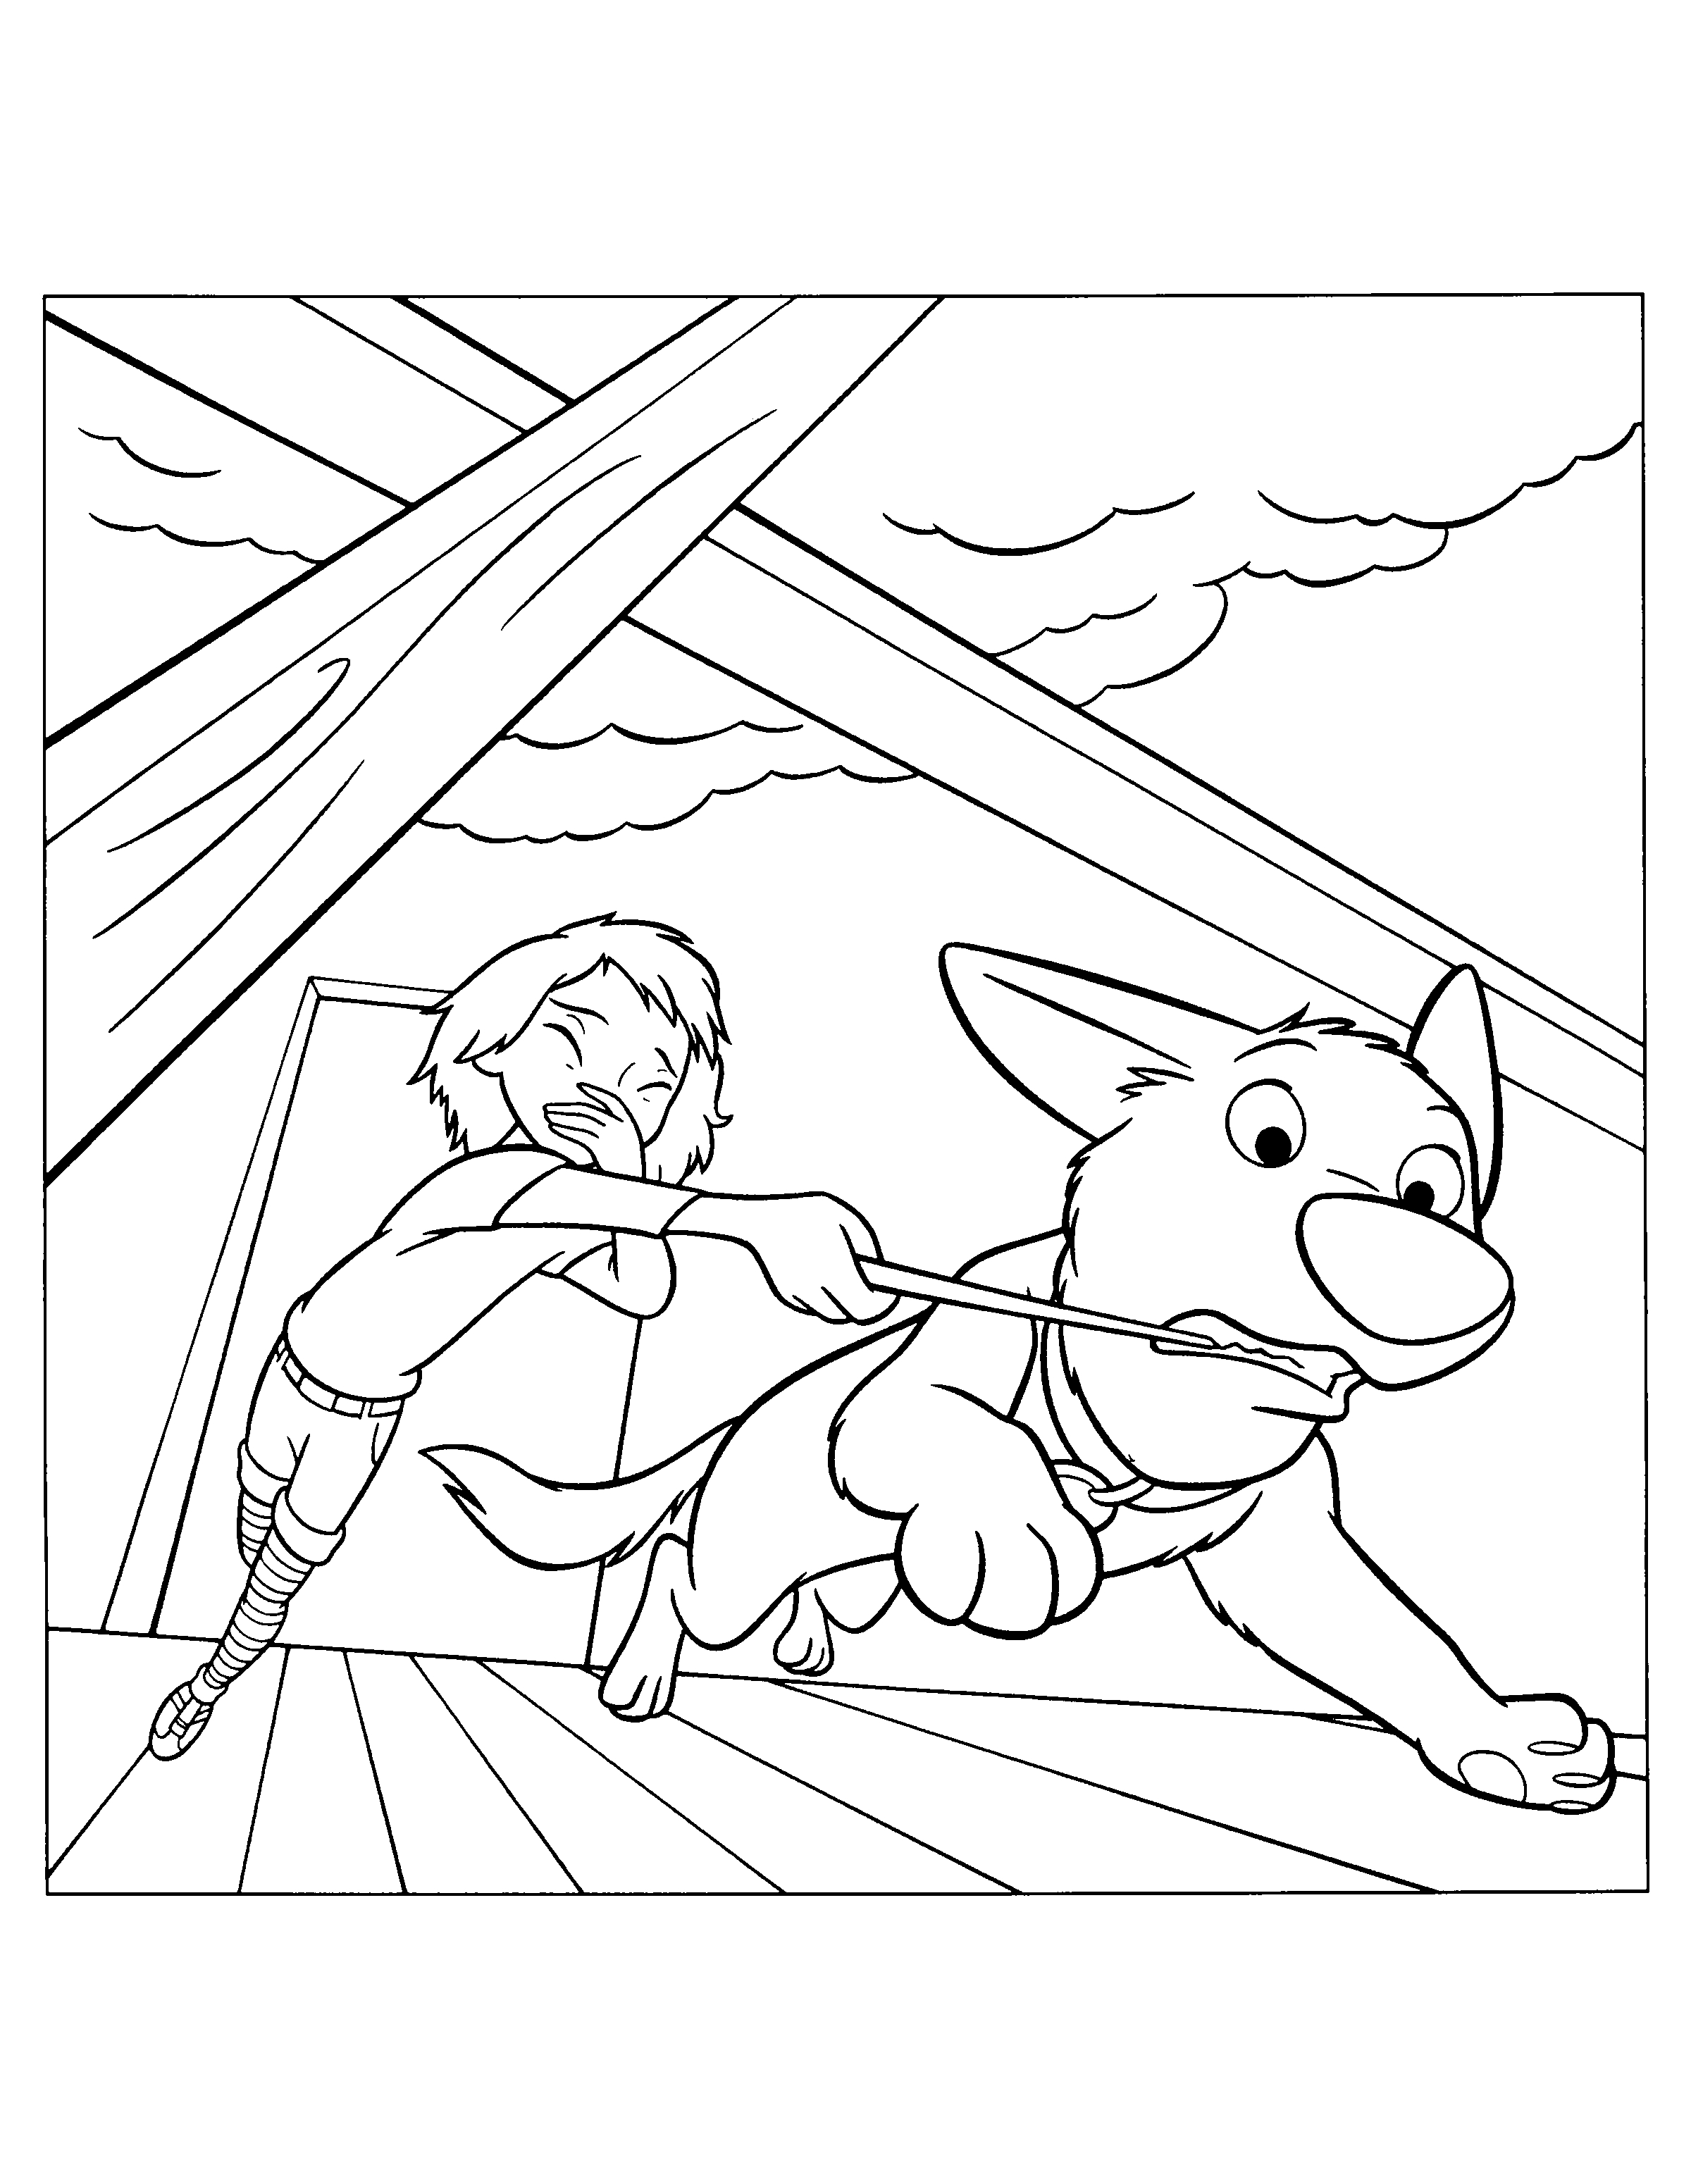 Lightning Bolt Coloring Page Coloring Pages Bolt Gifs Pnggif